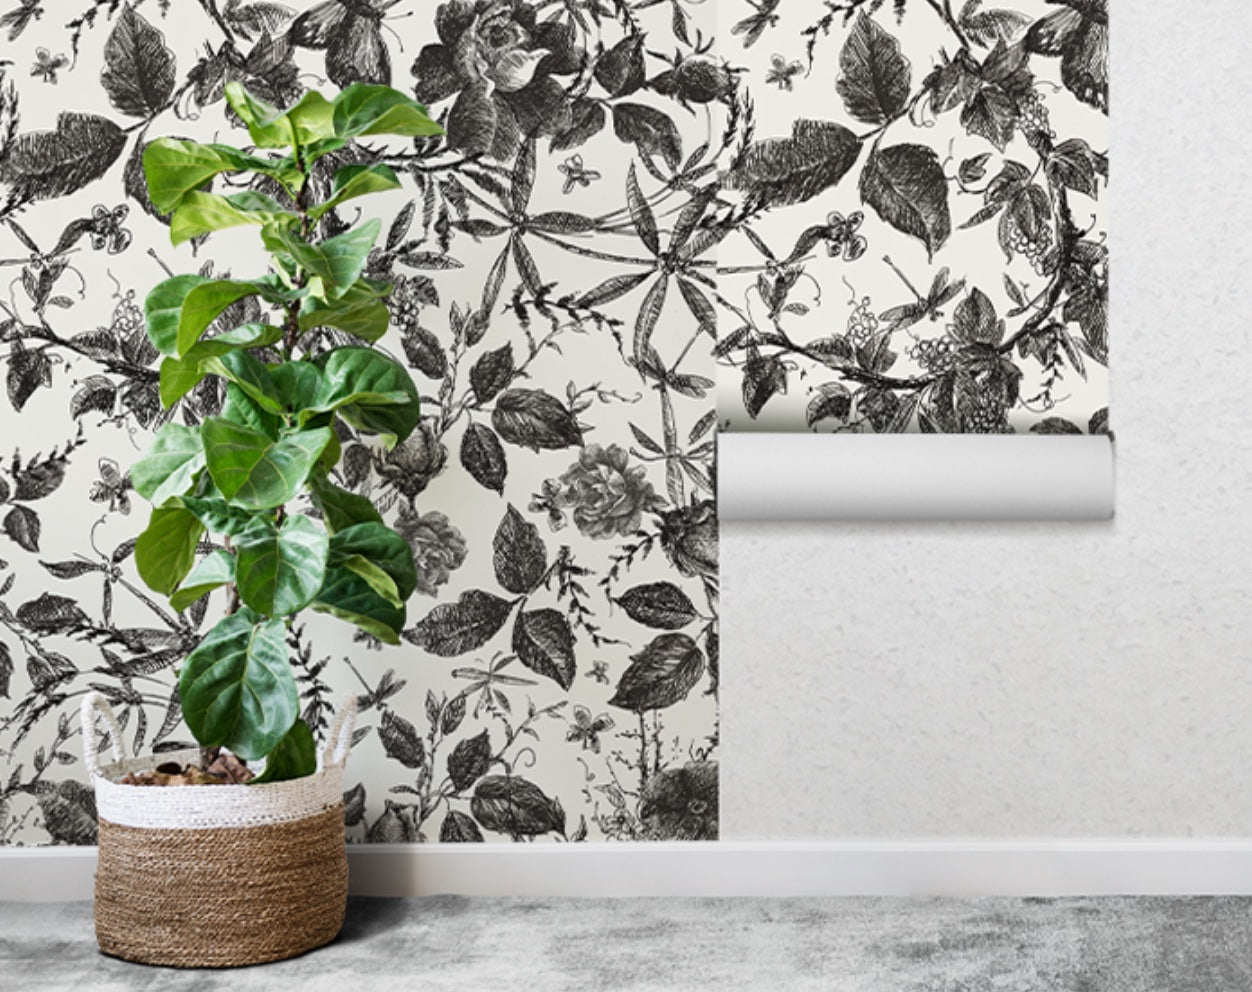 Flowers and butterfly Peel and stick, wall & furnitures sticker, black and white, 150 cm